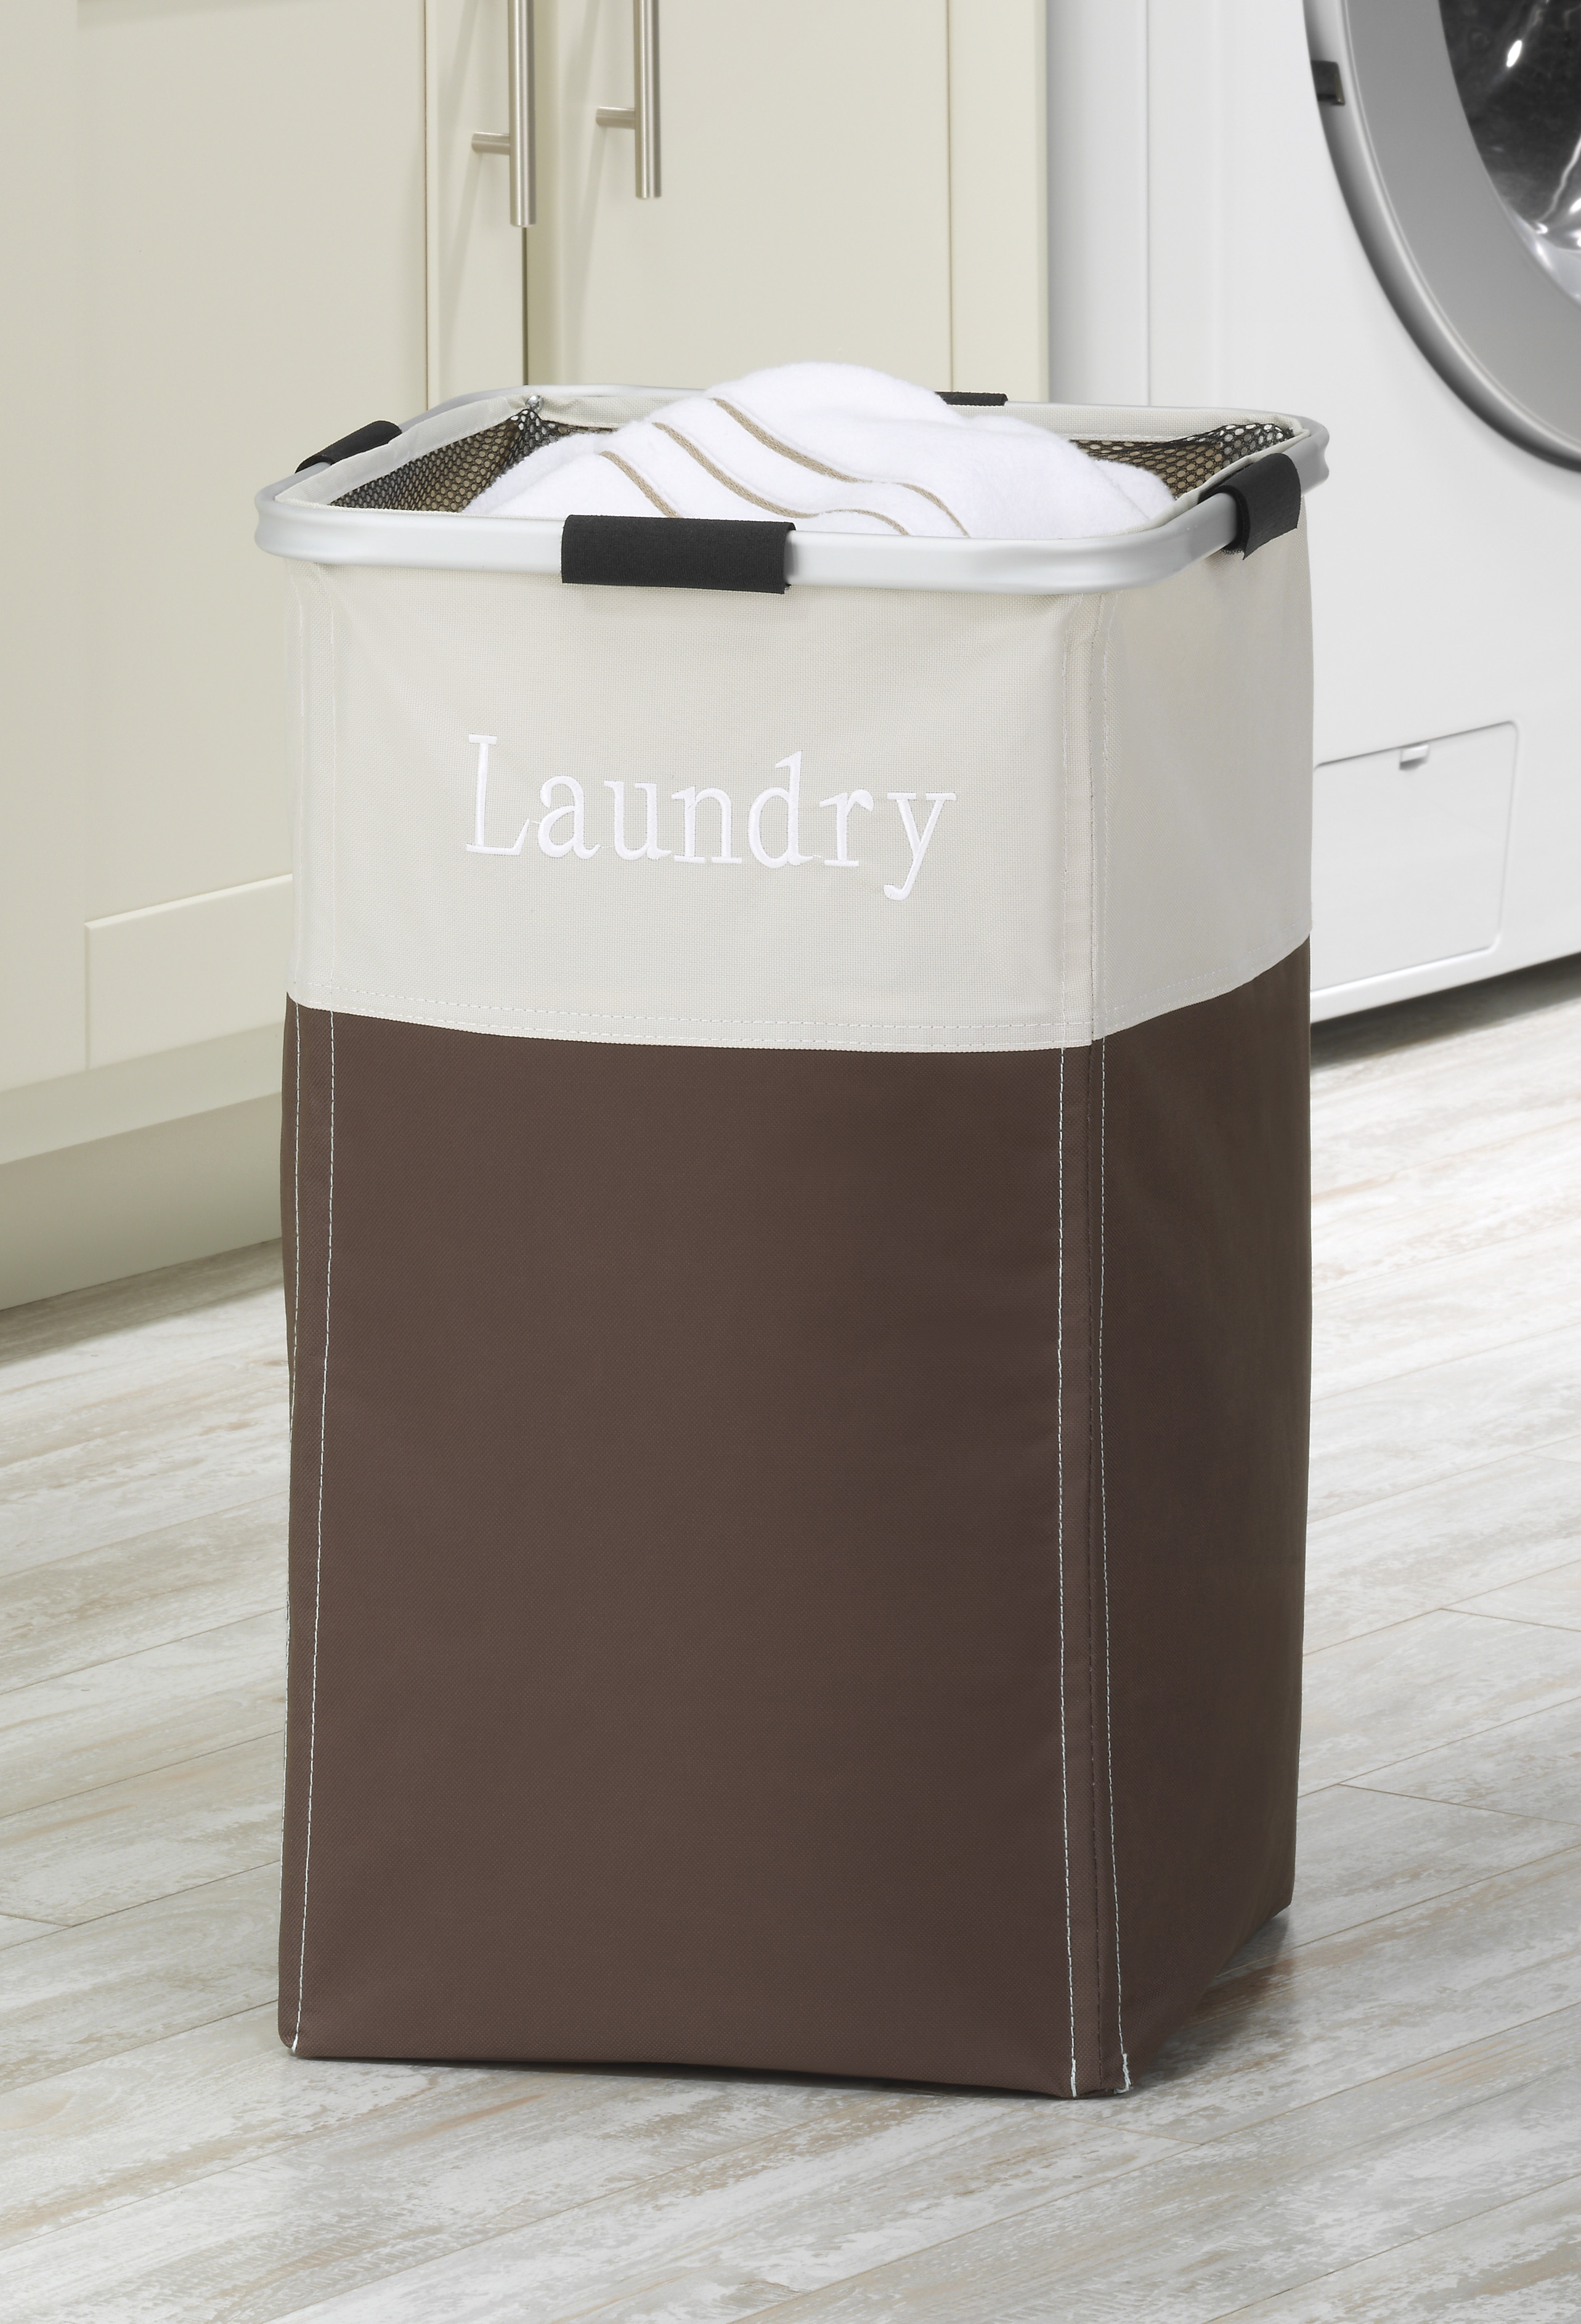 Whitmor Square Polyester Strap Metal Frame Laundry Hamper, Java - For all ages - image 3 of 10